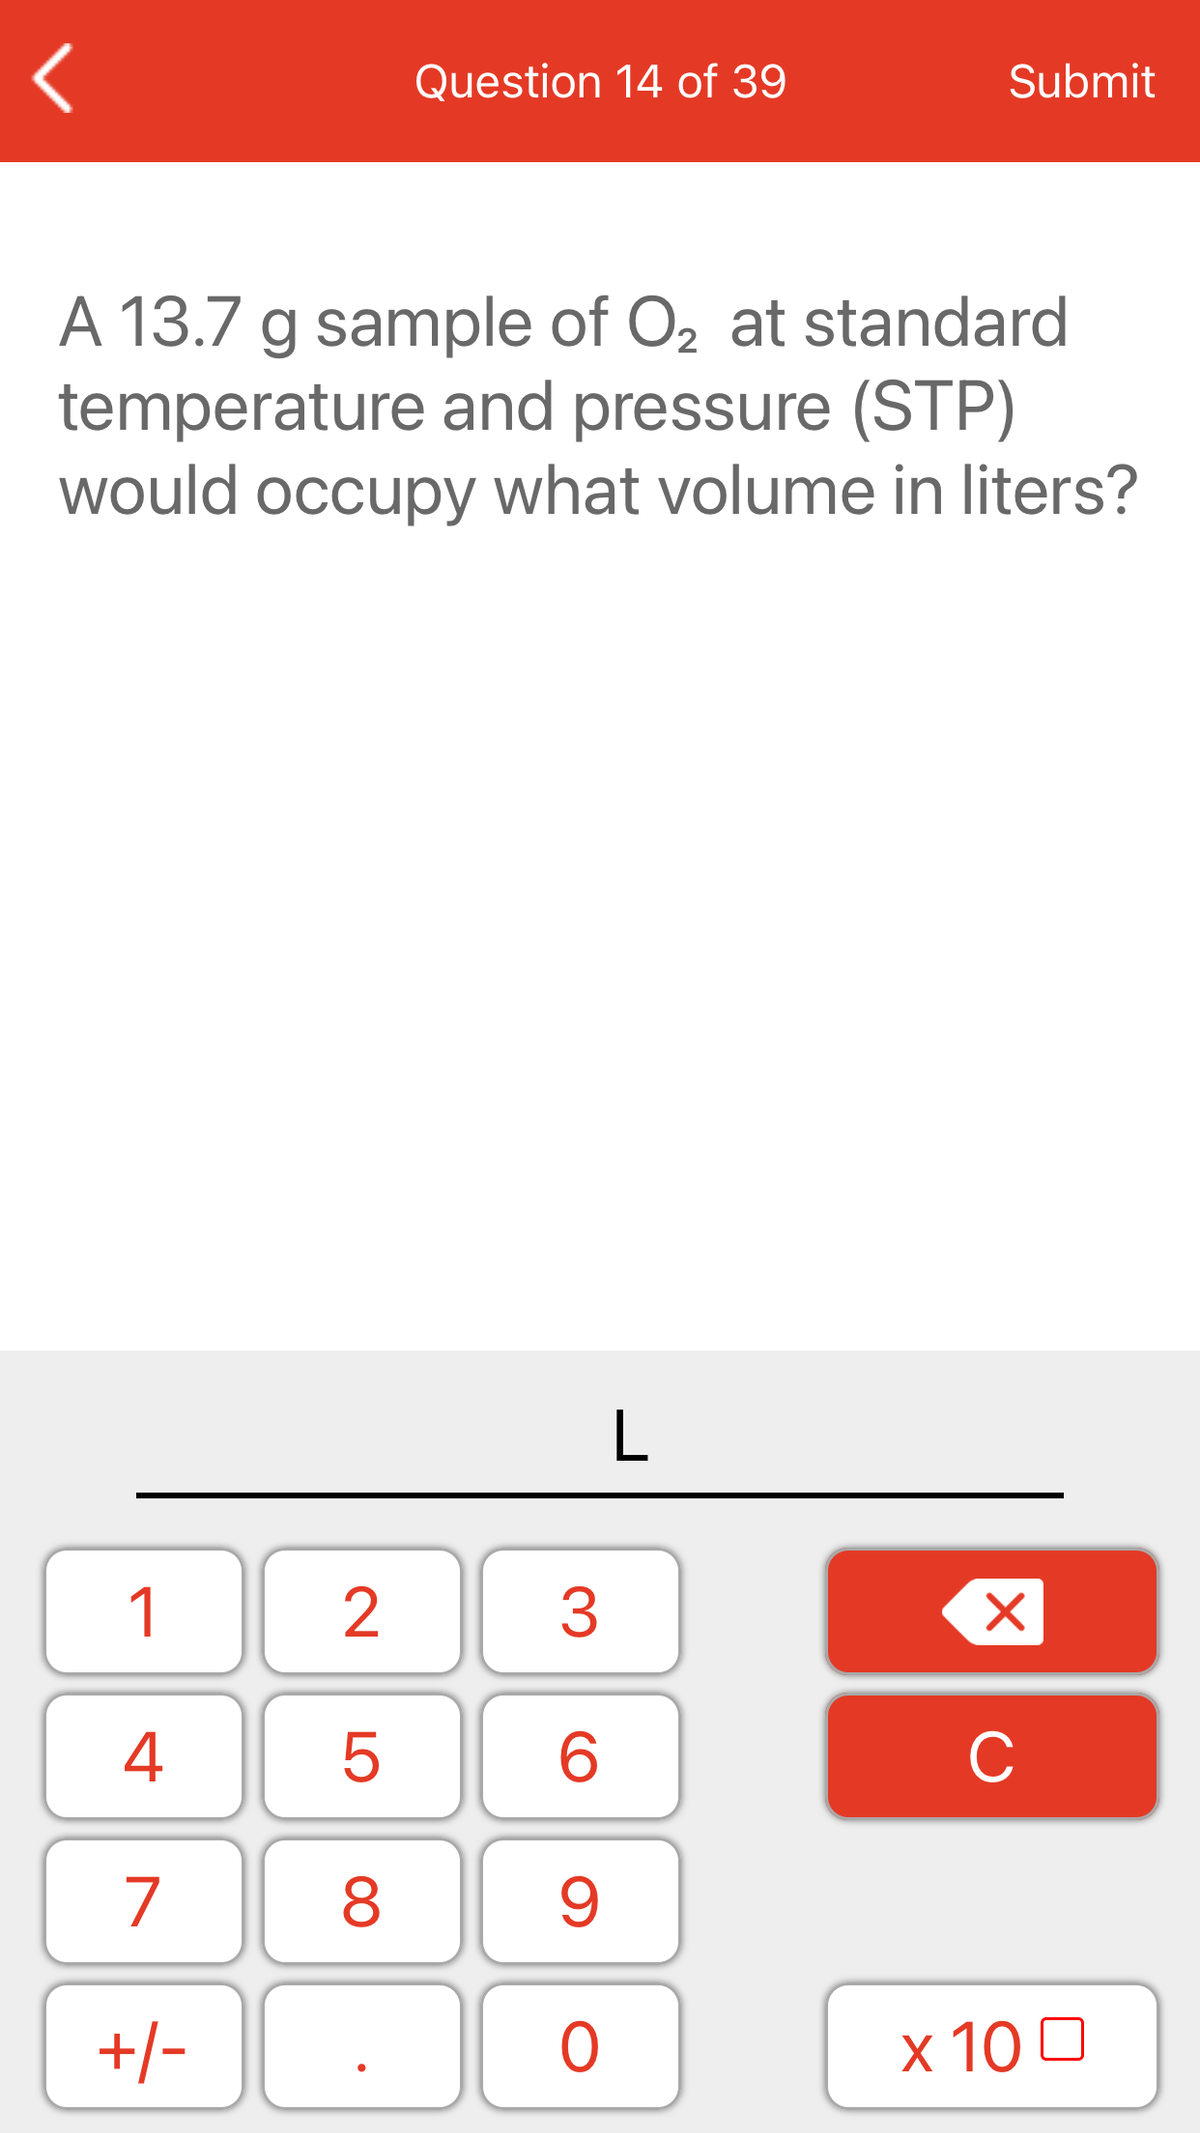 Question 14 of 39
Submit
A 13.7 g sample of O, at standard
temperature and pressure (STP)
would occupy what volume in liters?
L
1
2
3
4
C
7
+/-
x 10 0
LO
00
